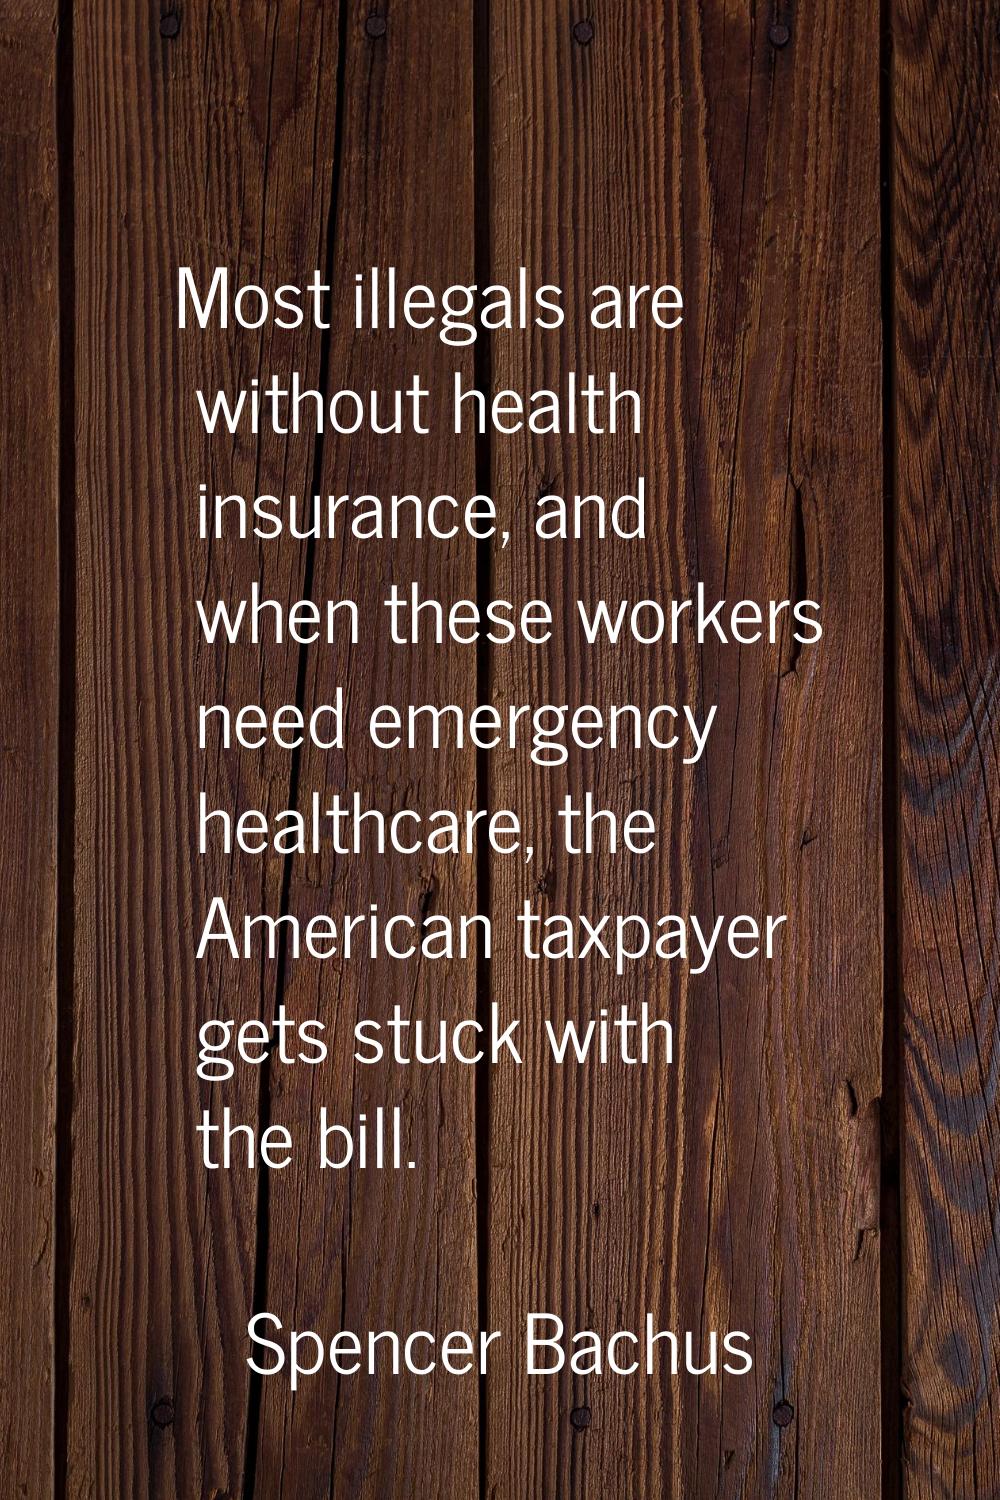 Most illegals are without health insurance, and when these workers need emergency healthcare, the A